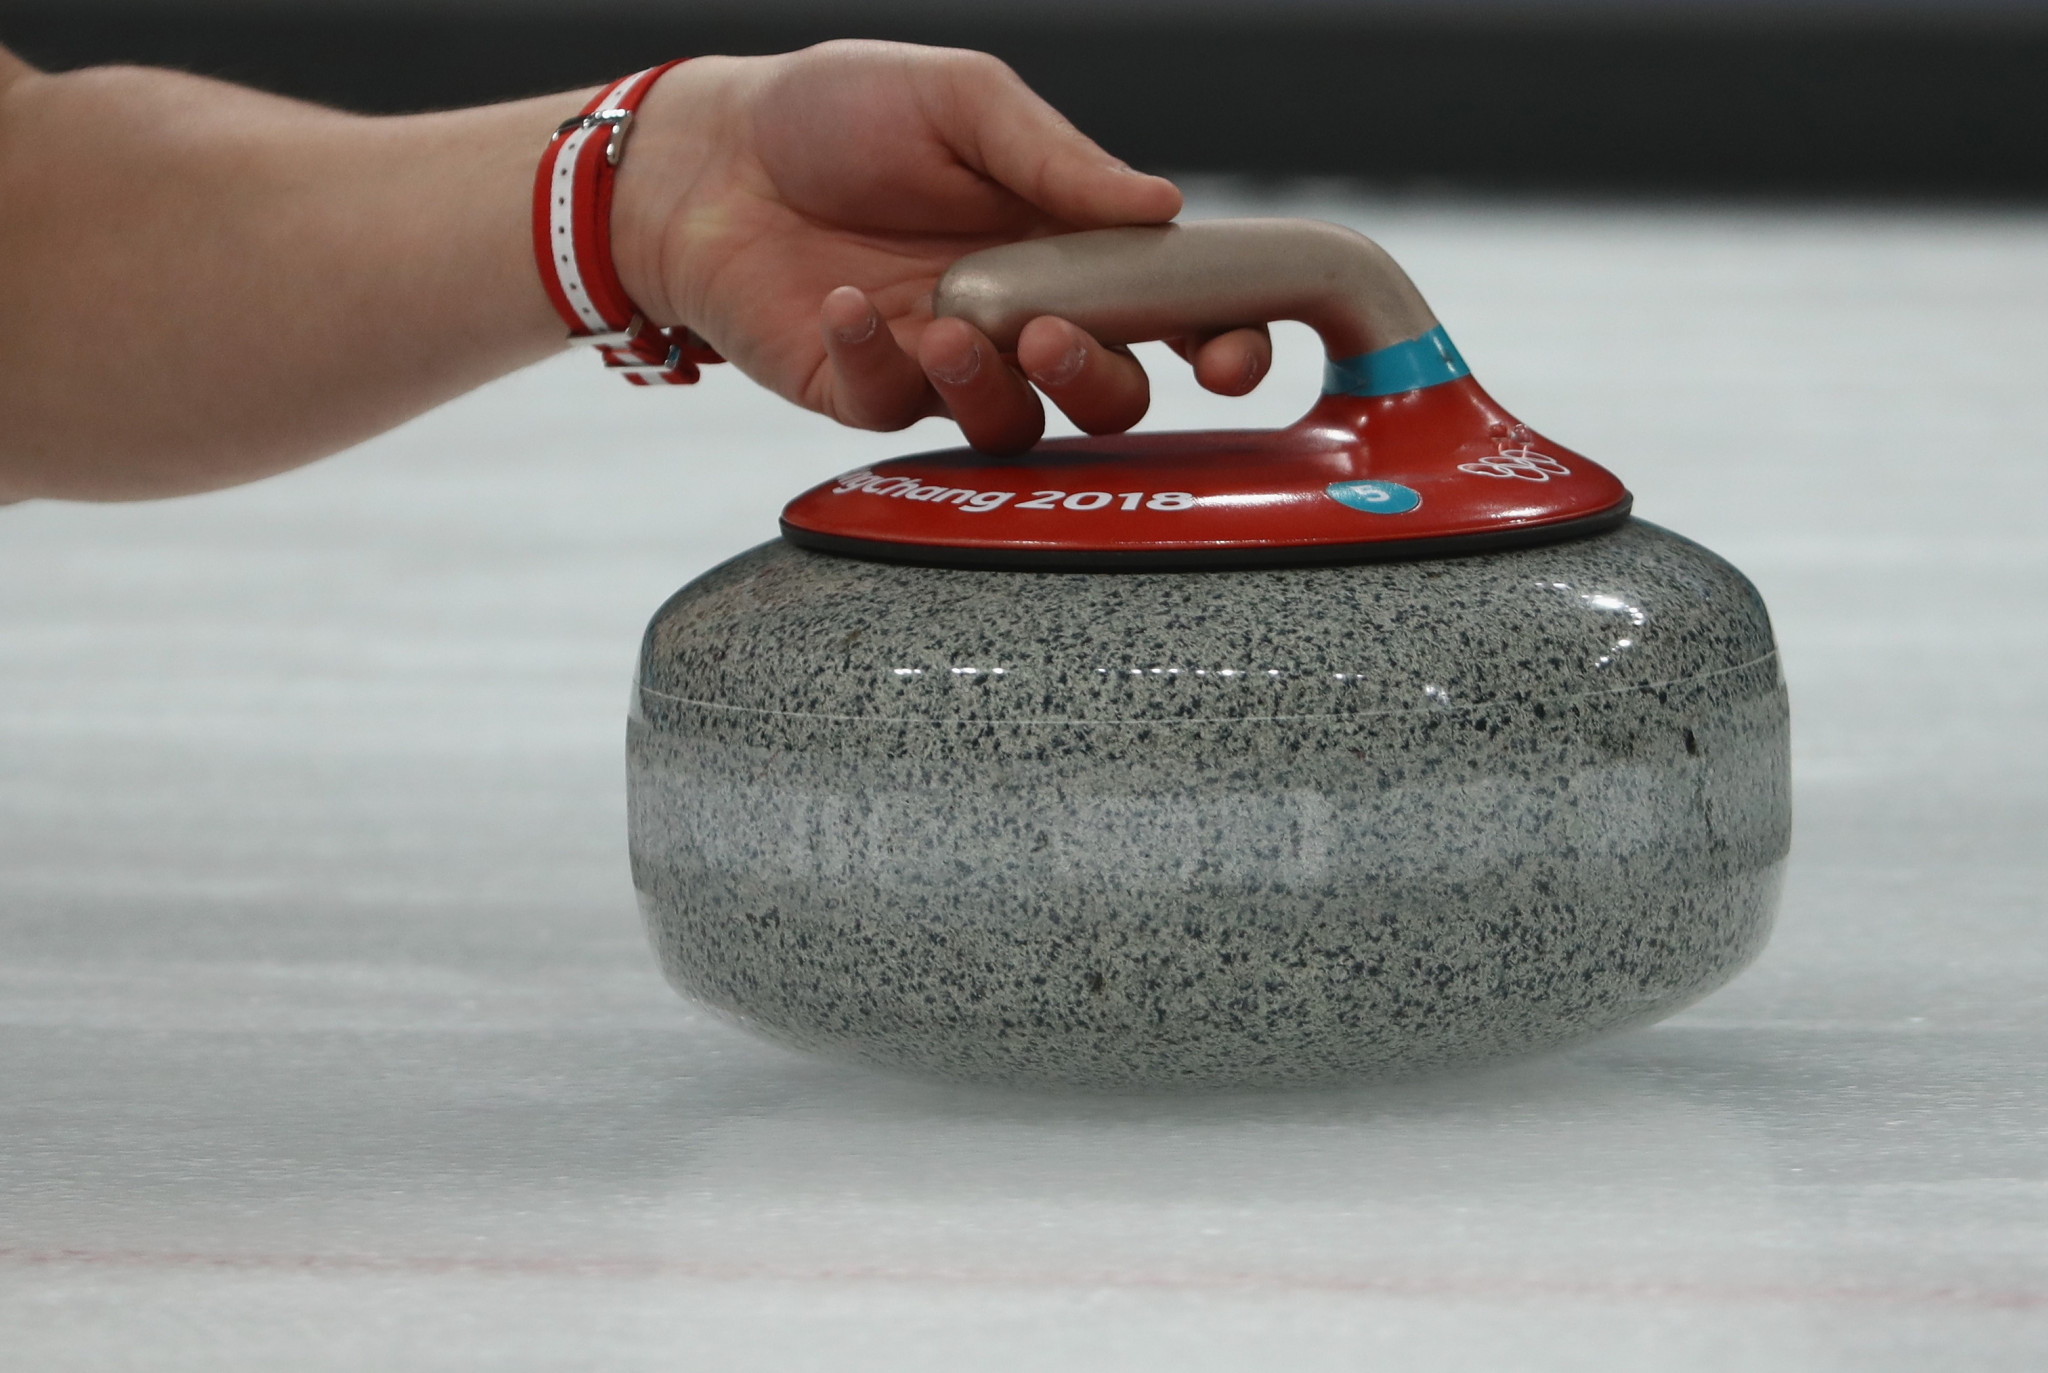 Canada is the most successful country in curling at the Winter Olympics with six gold medals ©Getty Images